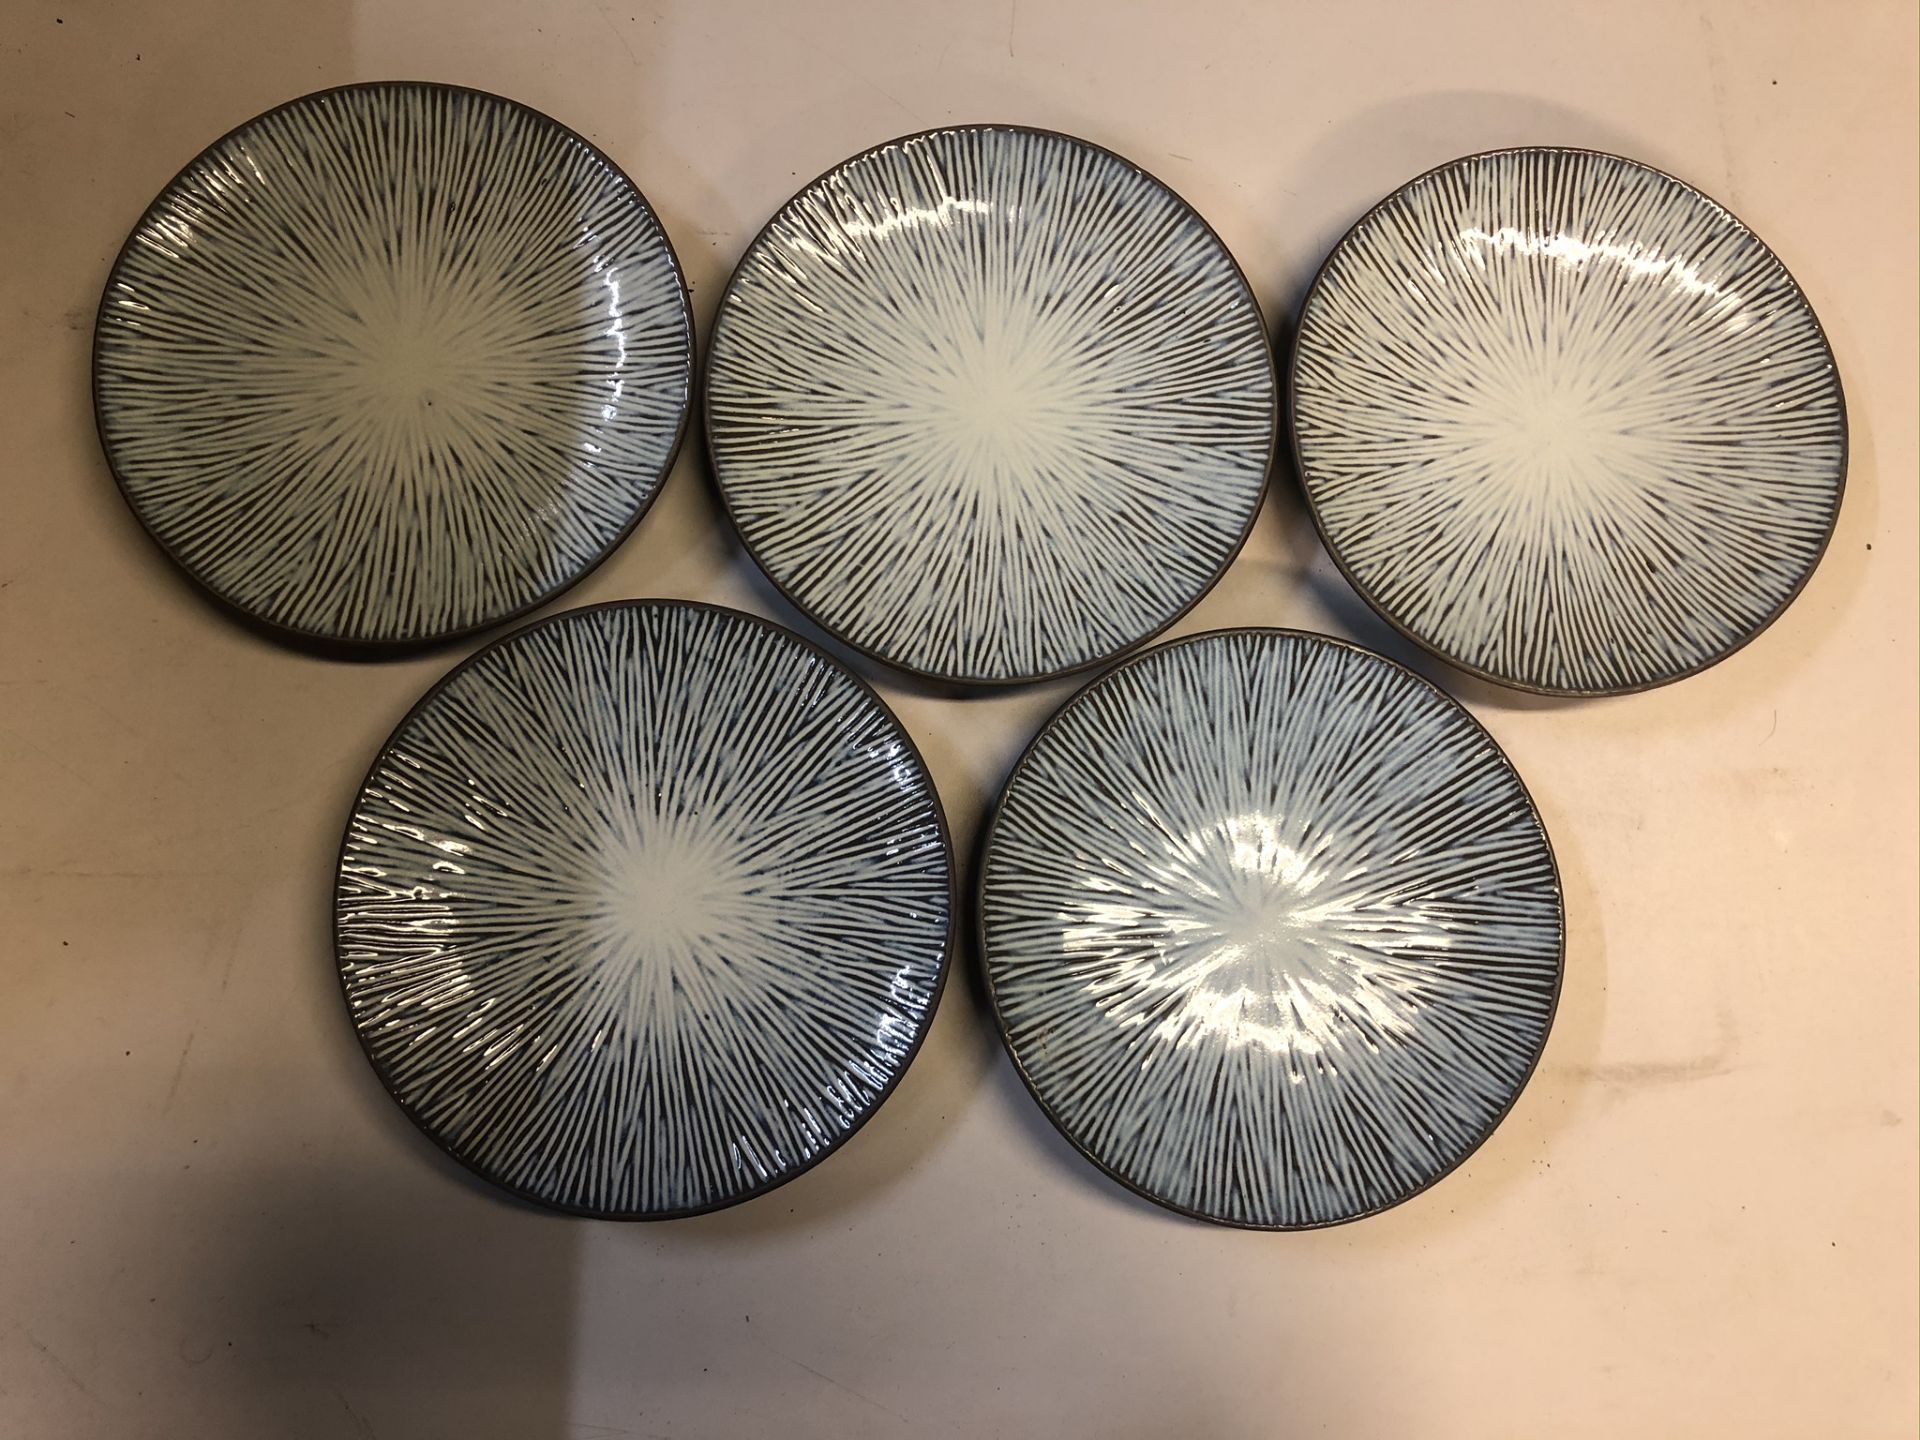 20 x Utopia Porcelain Dinner Plates in Grey/Blue - Image 2 of 4